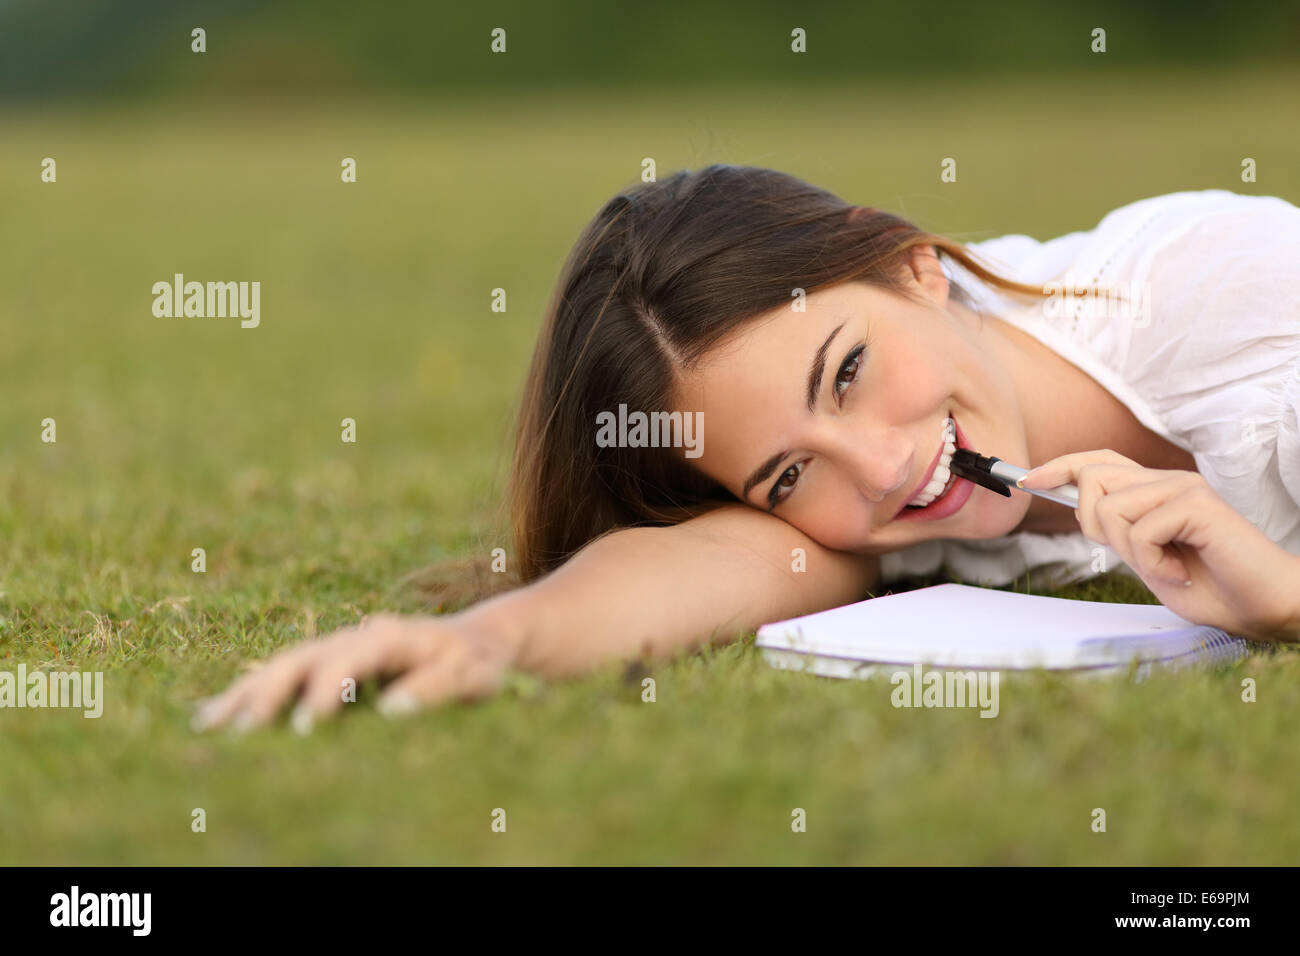 Candid happy woman lying on the grass writing with a green unfocused background Stock Photo